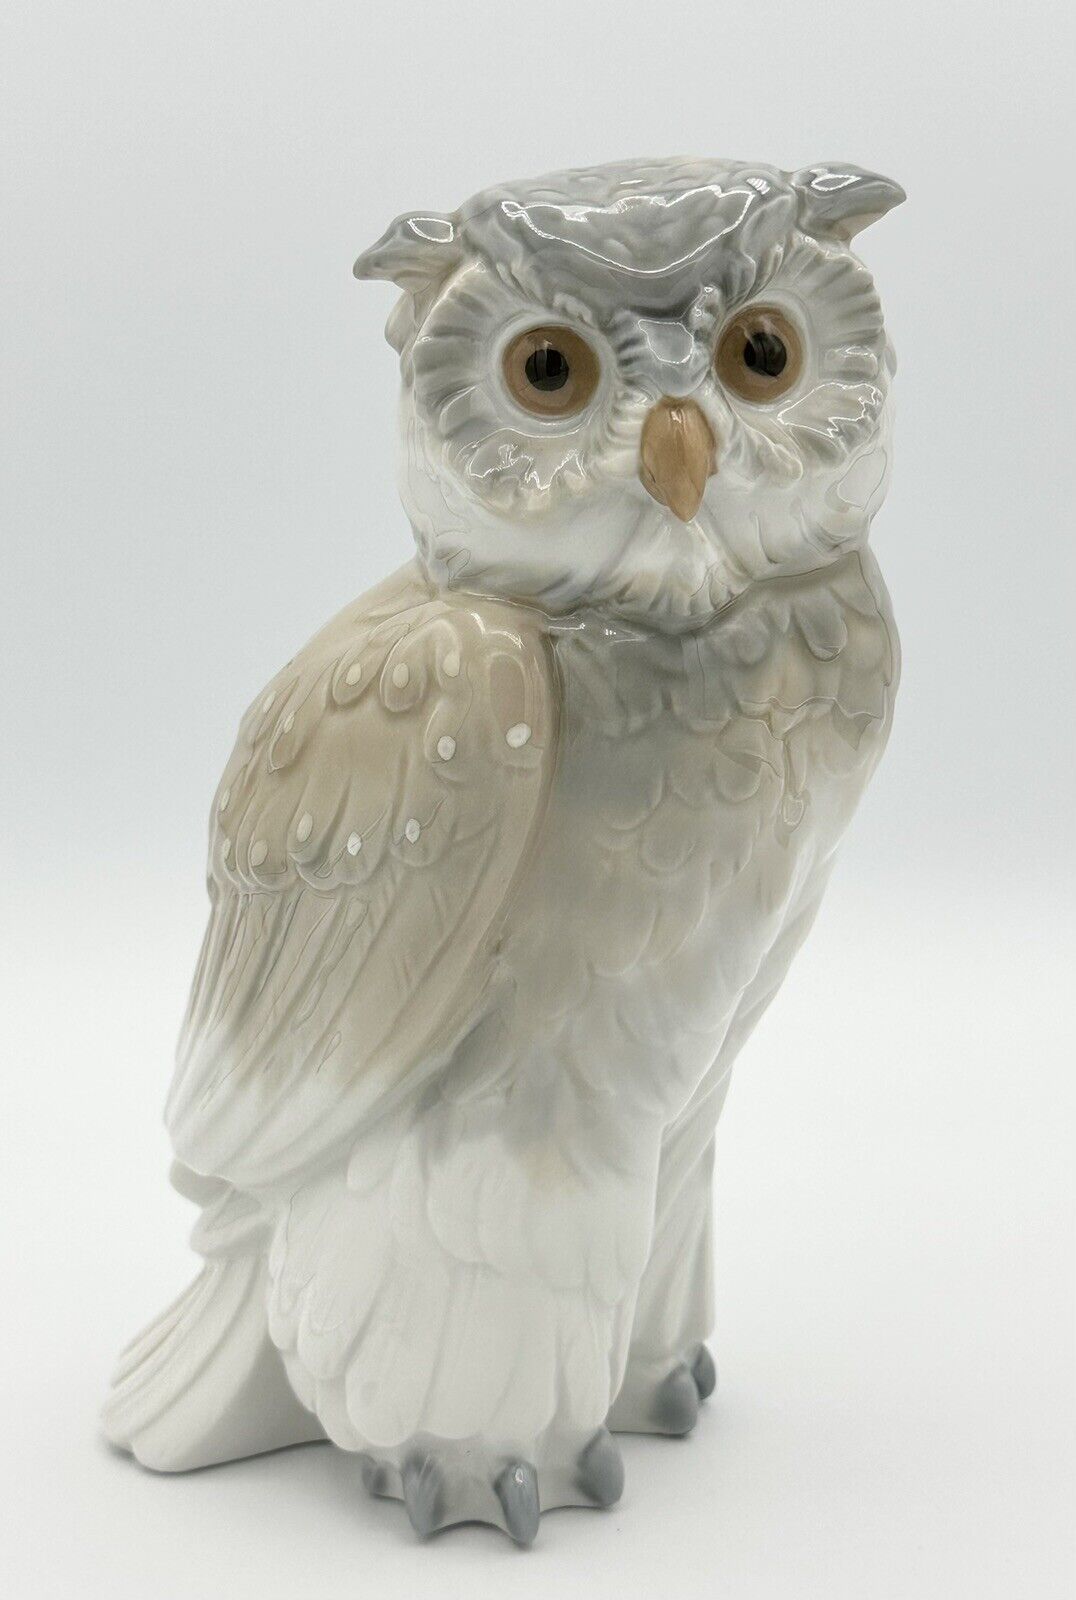 Vintage Nao by Lladro Porcelain Short Eared Owl Gray & White Spain